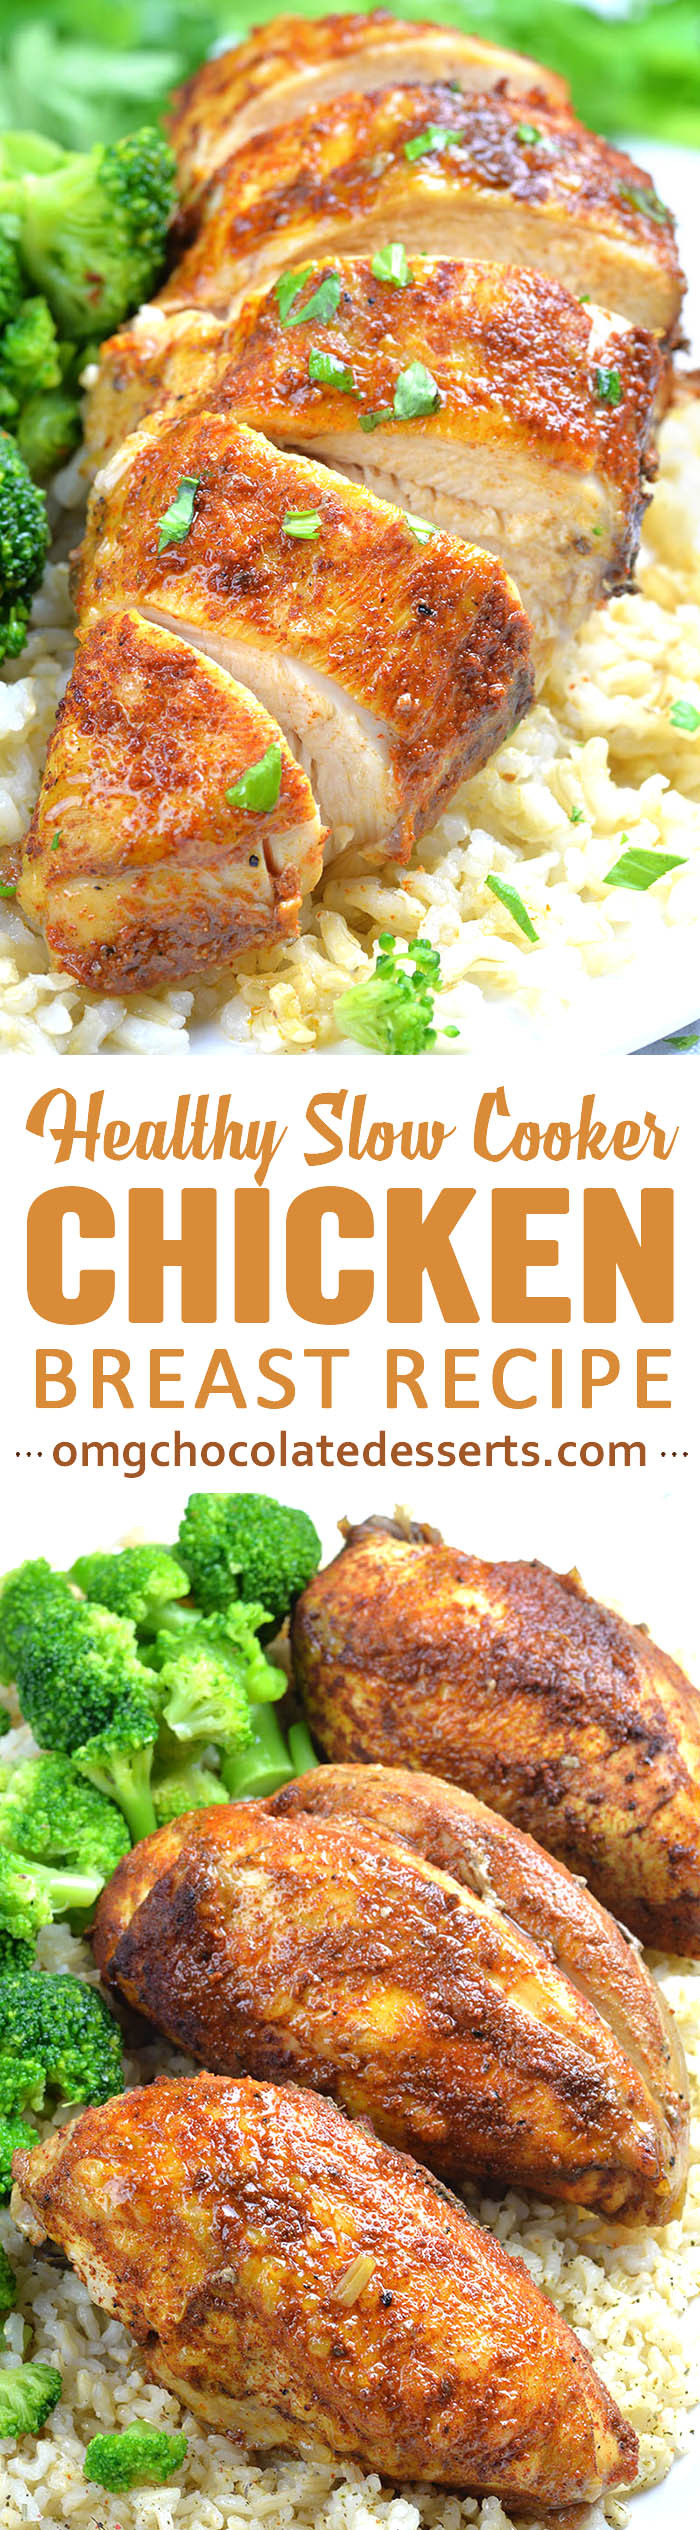 Slow Cooker Chicken Breast Recipes Healthy
 Healthy Slow Cooker Chicken Breast Recipe OMG Chocolate